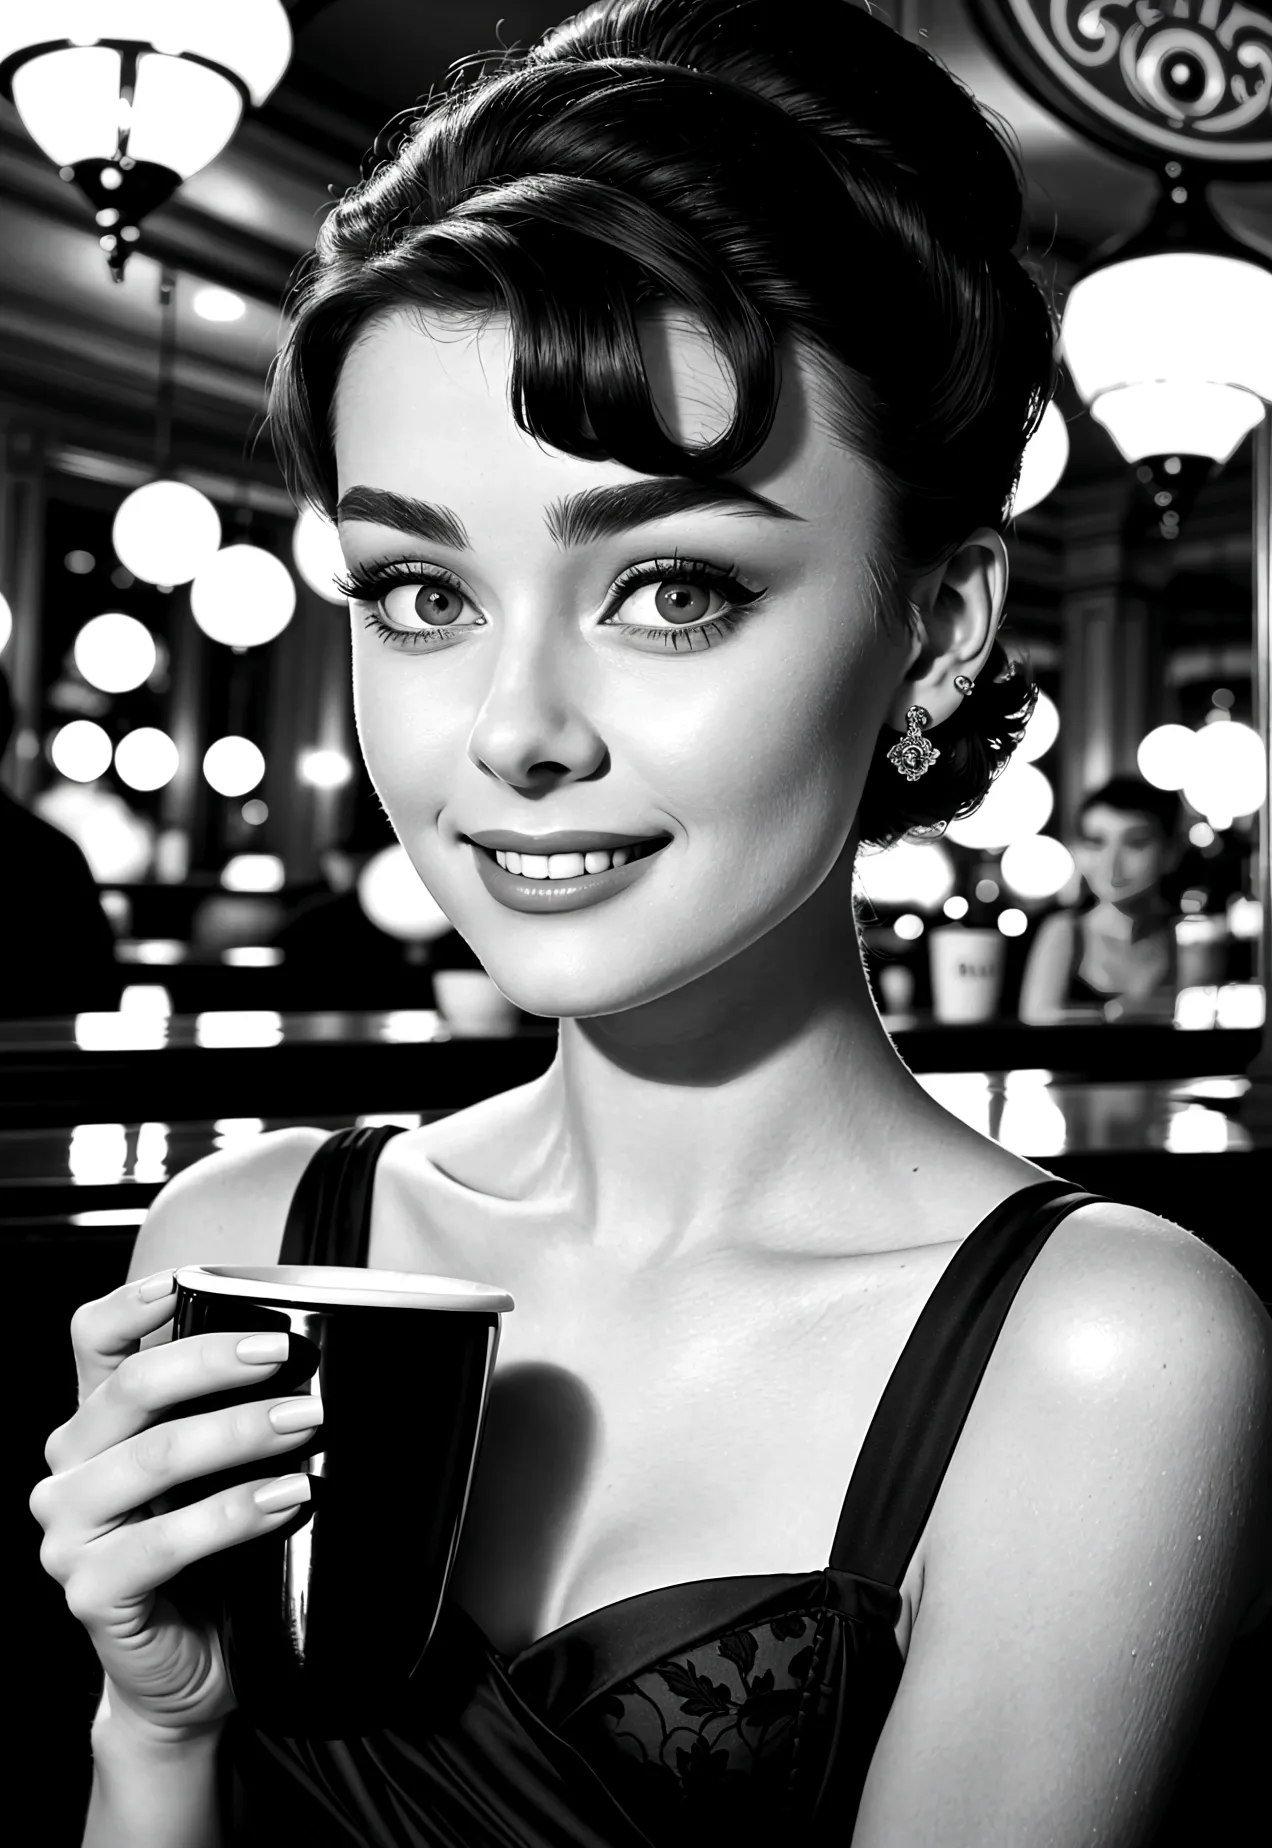 Photograph of a 20-year-old woman who looks like Audrey Hepburn: short dark hair, big expressive eyes and an elegant smile, drin...